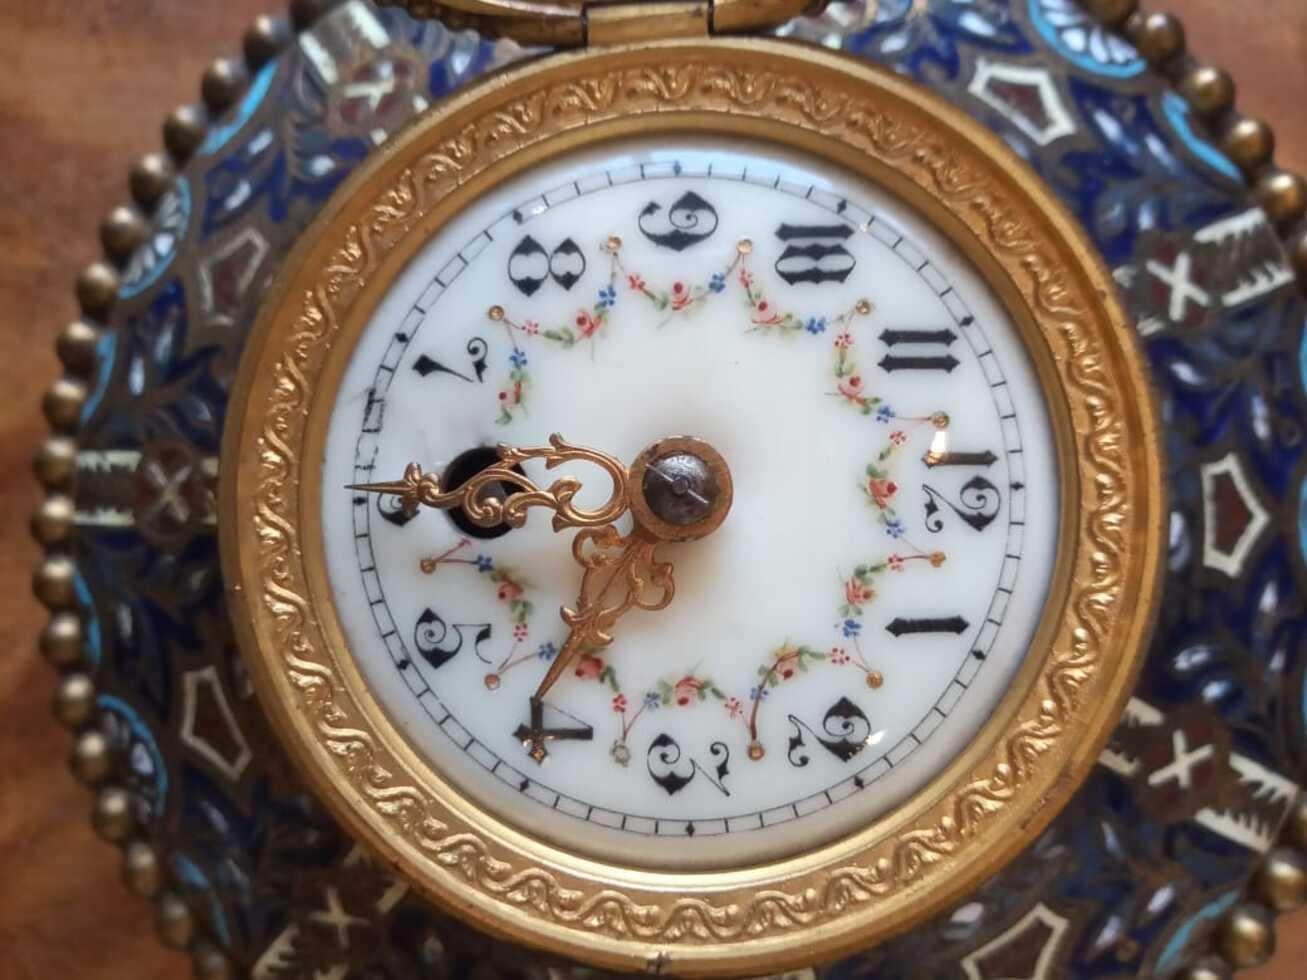 Napoleon III table clock
bronze and champlevé enamel
running and with your key
origin France 19th century
(revolving support)
perfect condition.